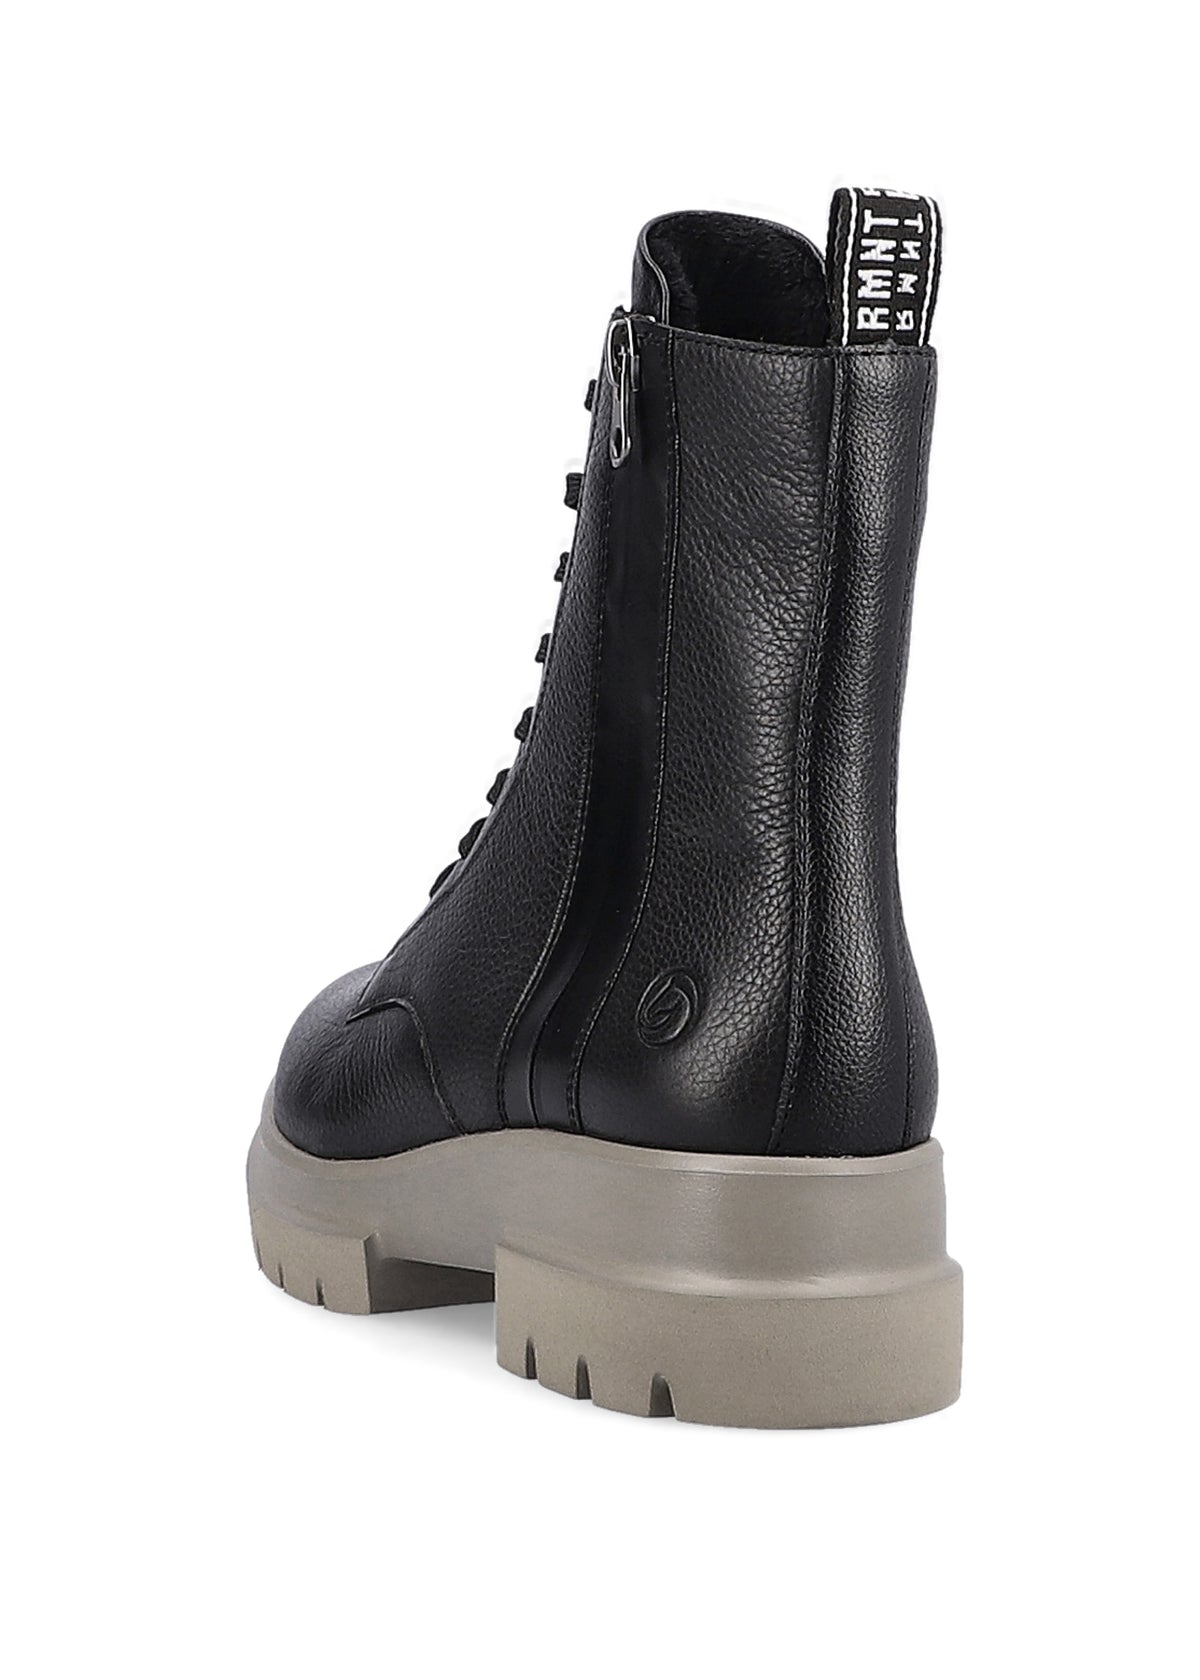 Ankle boots with stud heel - black, light sole